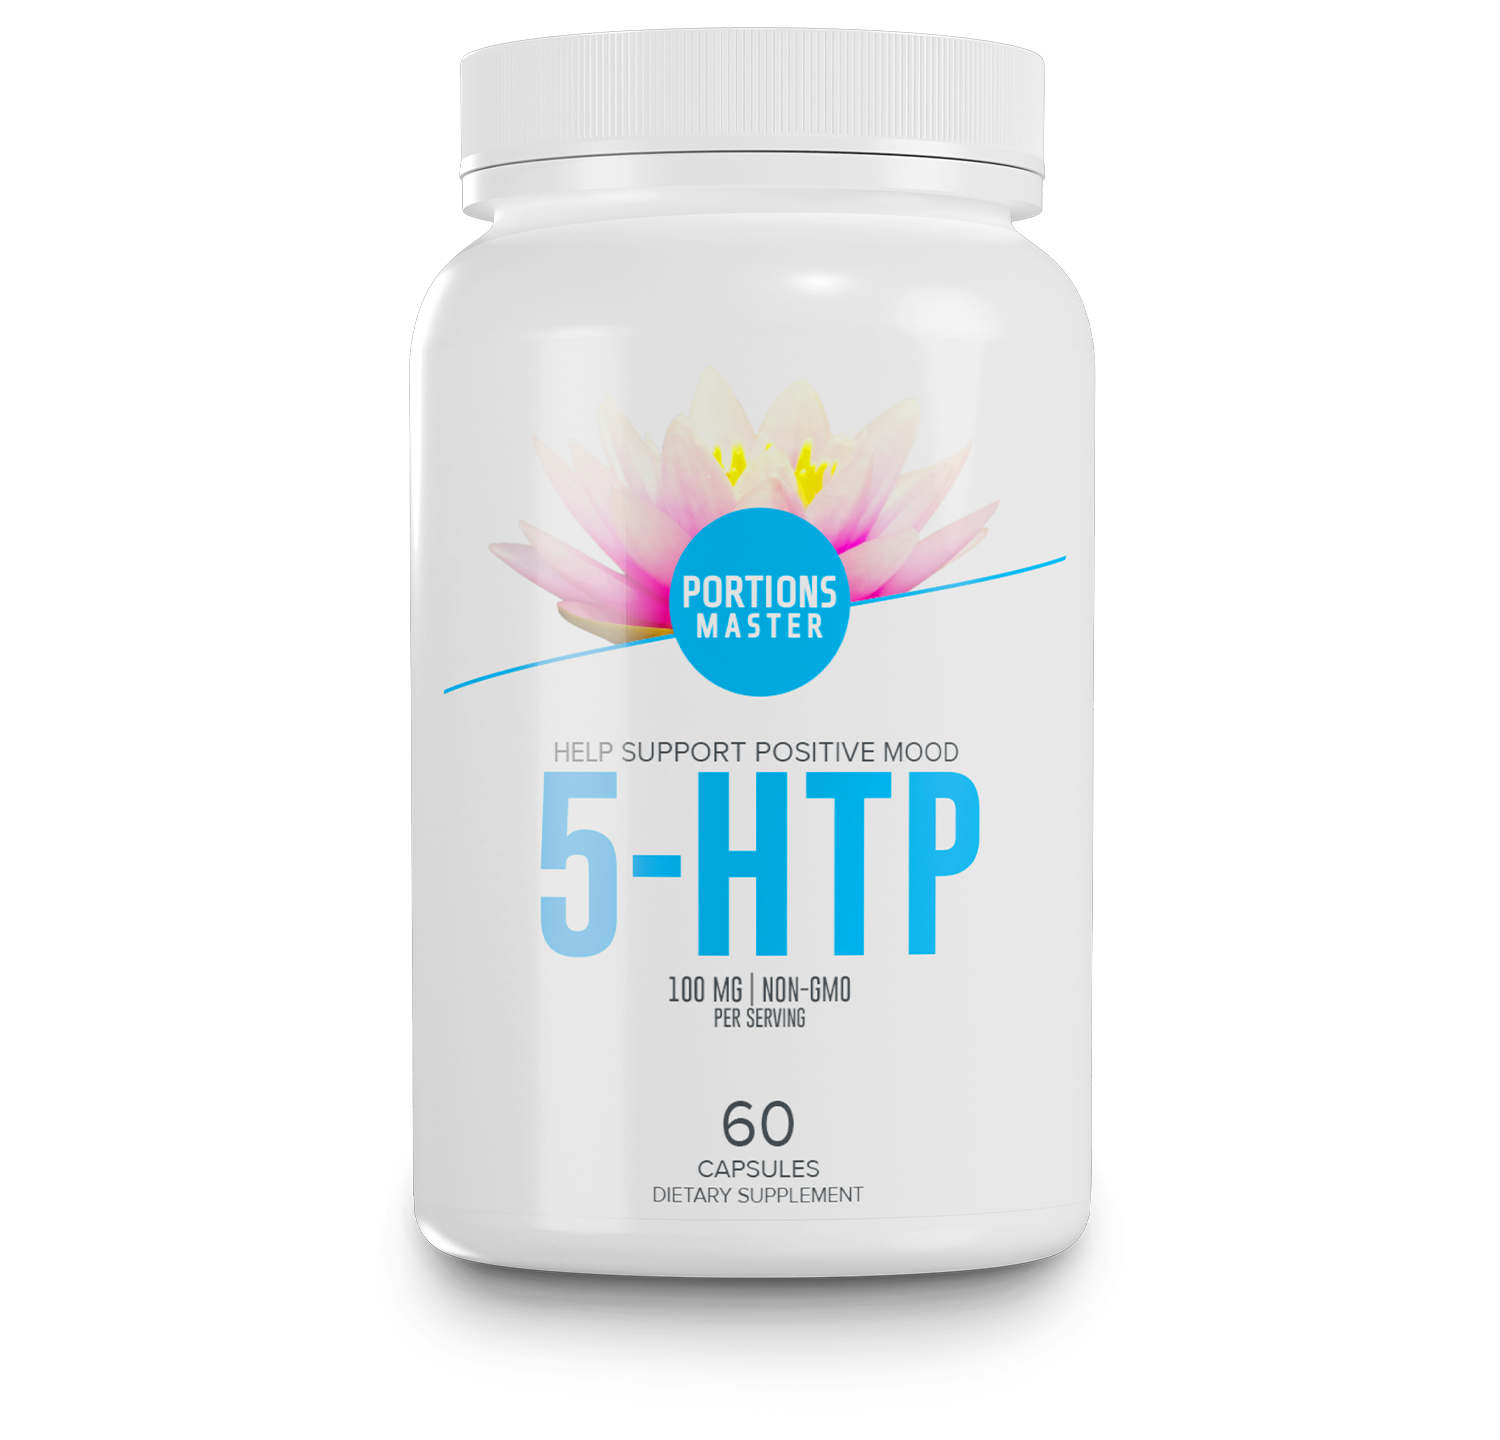 Portions Master 5-HTP Capsules